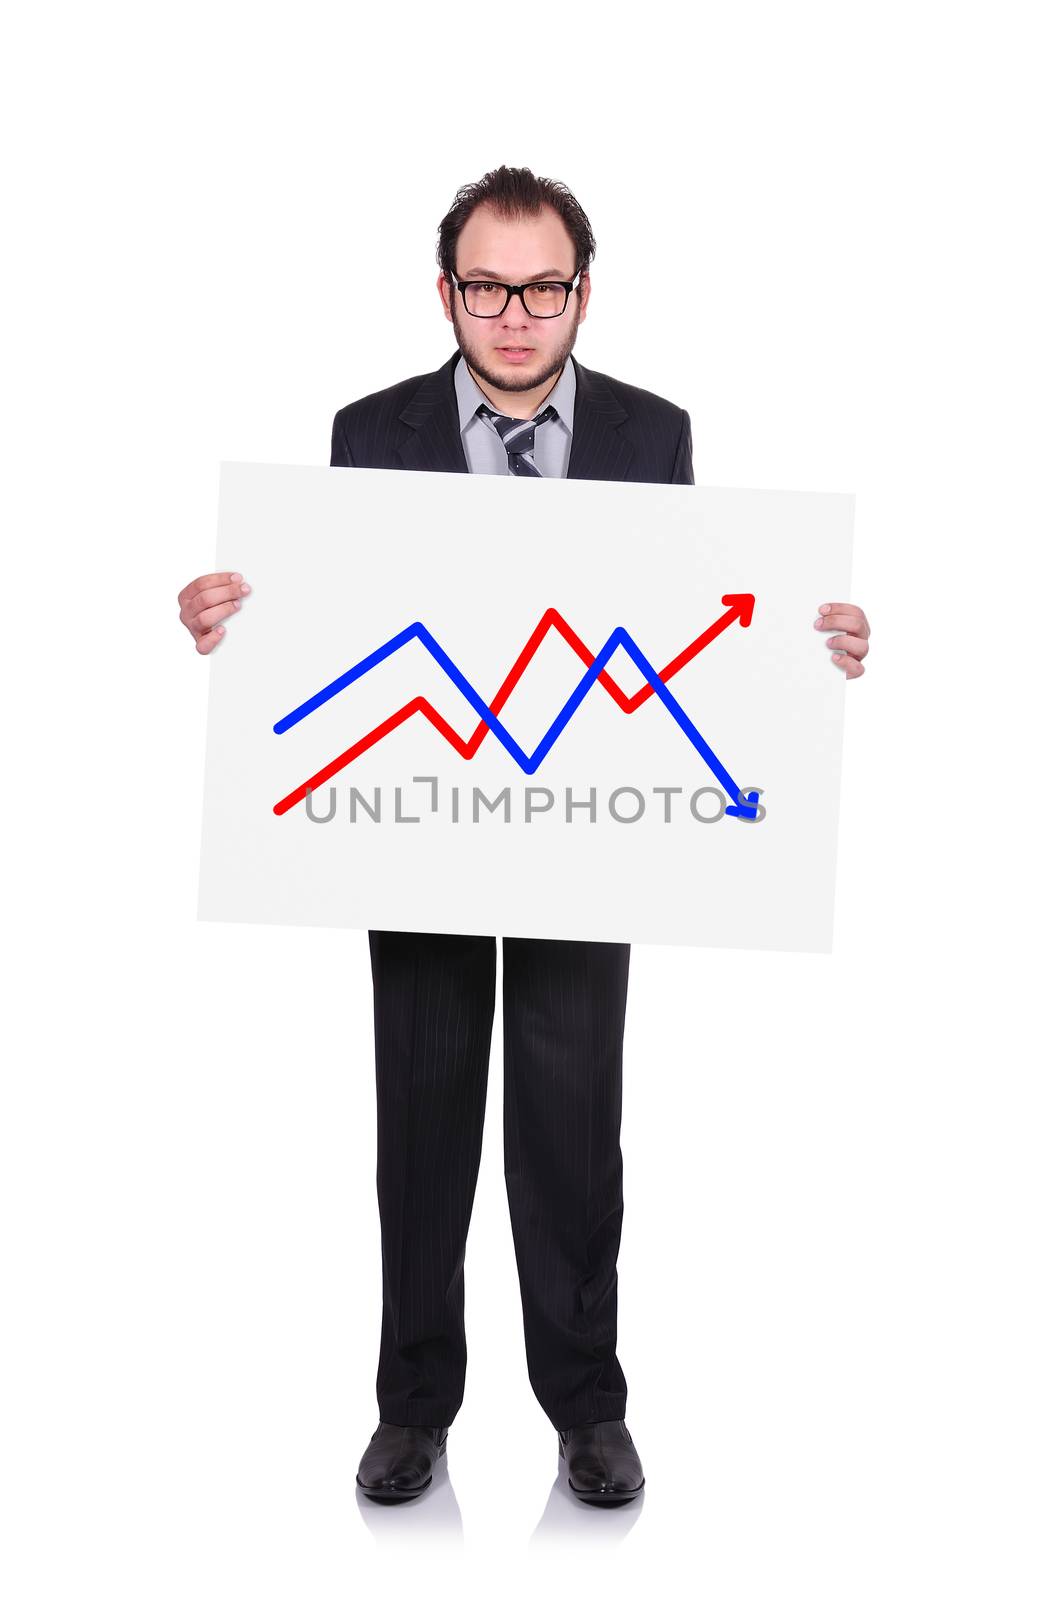 businessman holding a placard with chart of profits